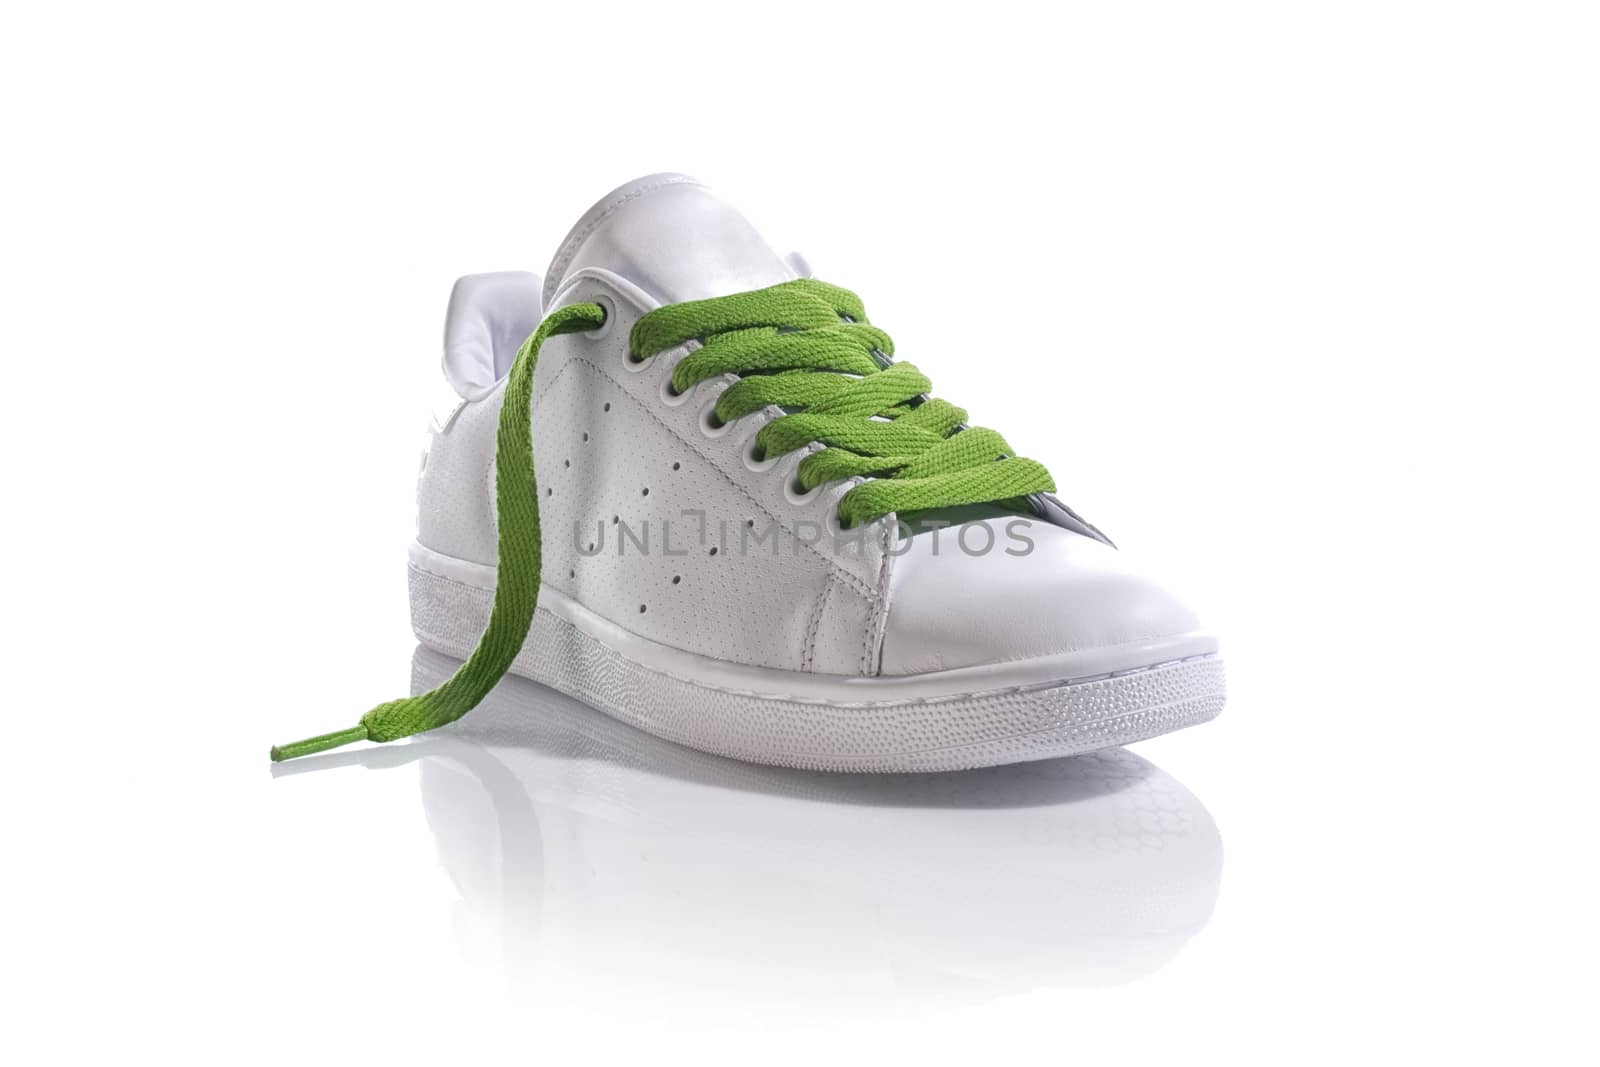 White sneaker with green laces on white background